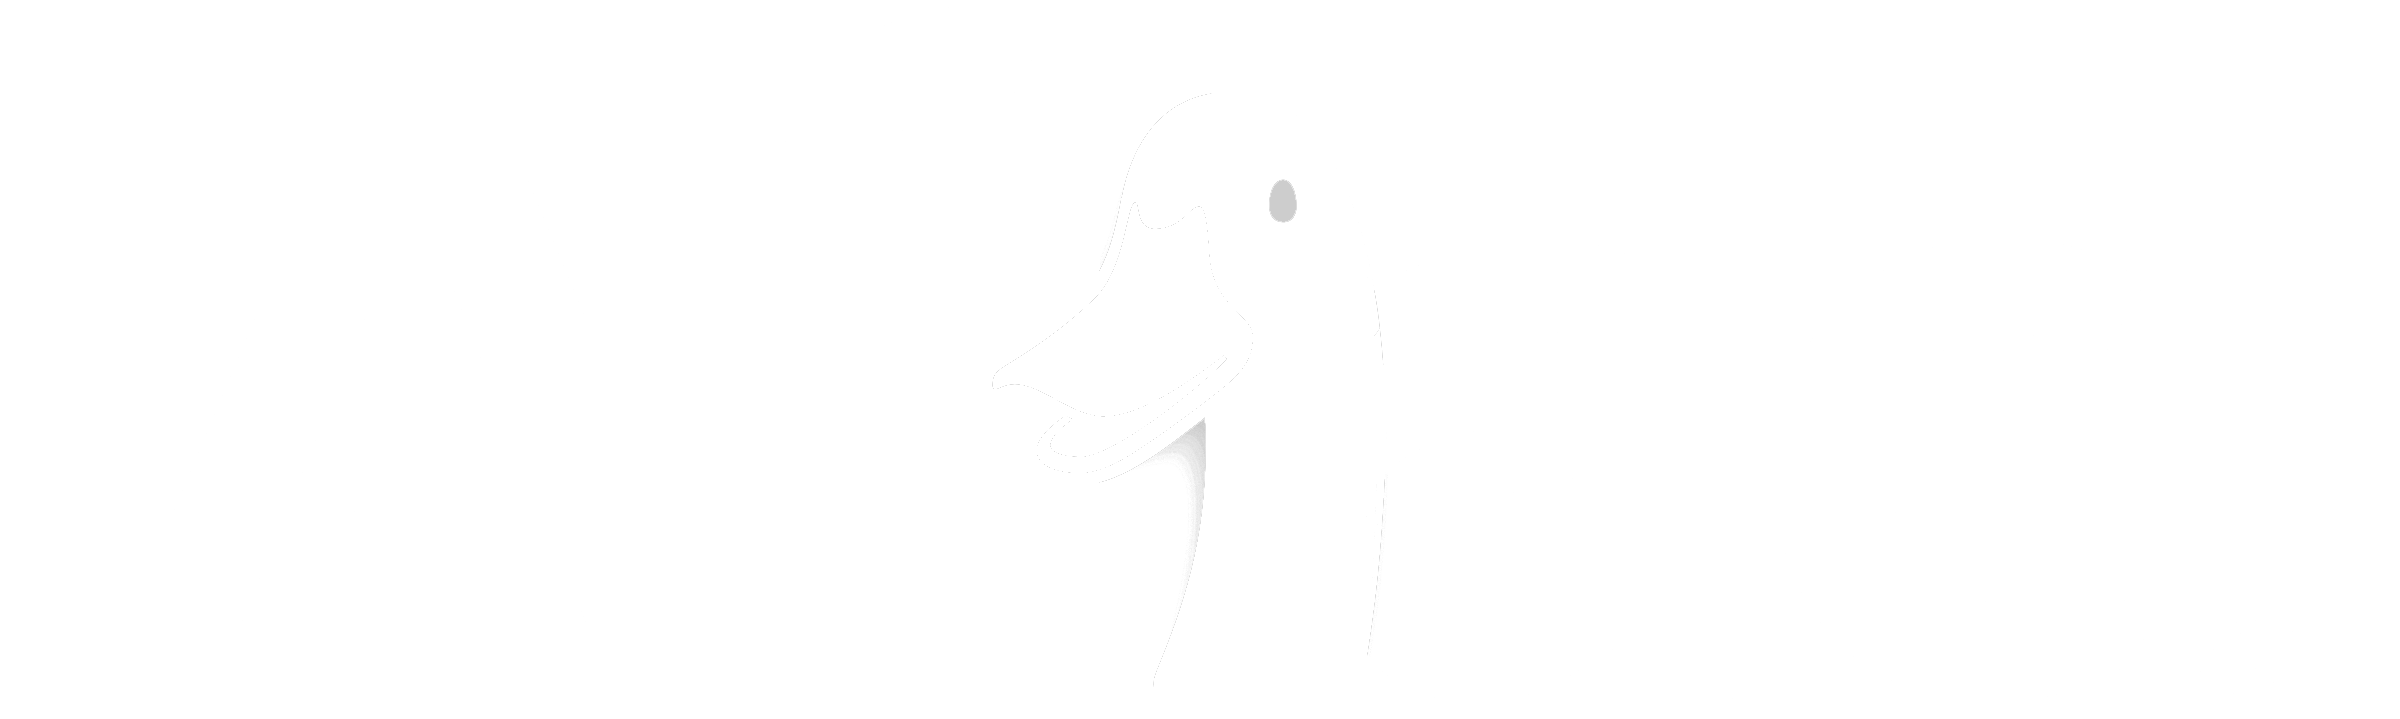 aflac-logo-black-and-white-inverted